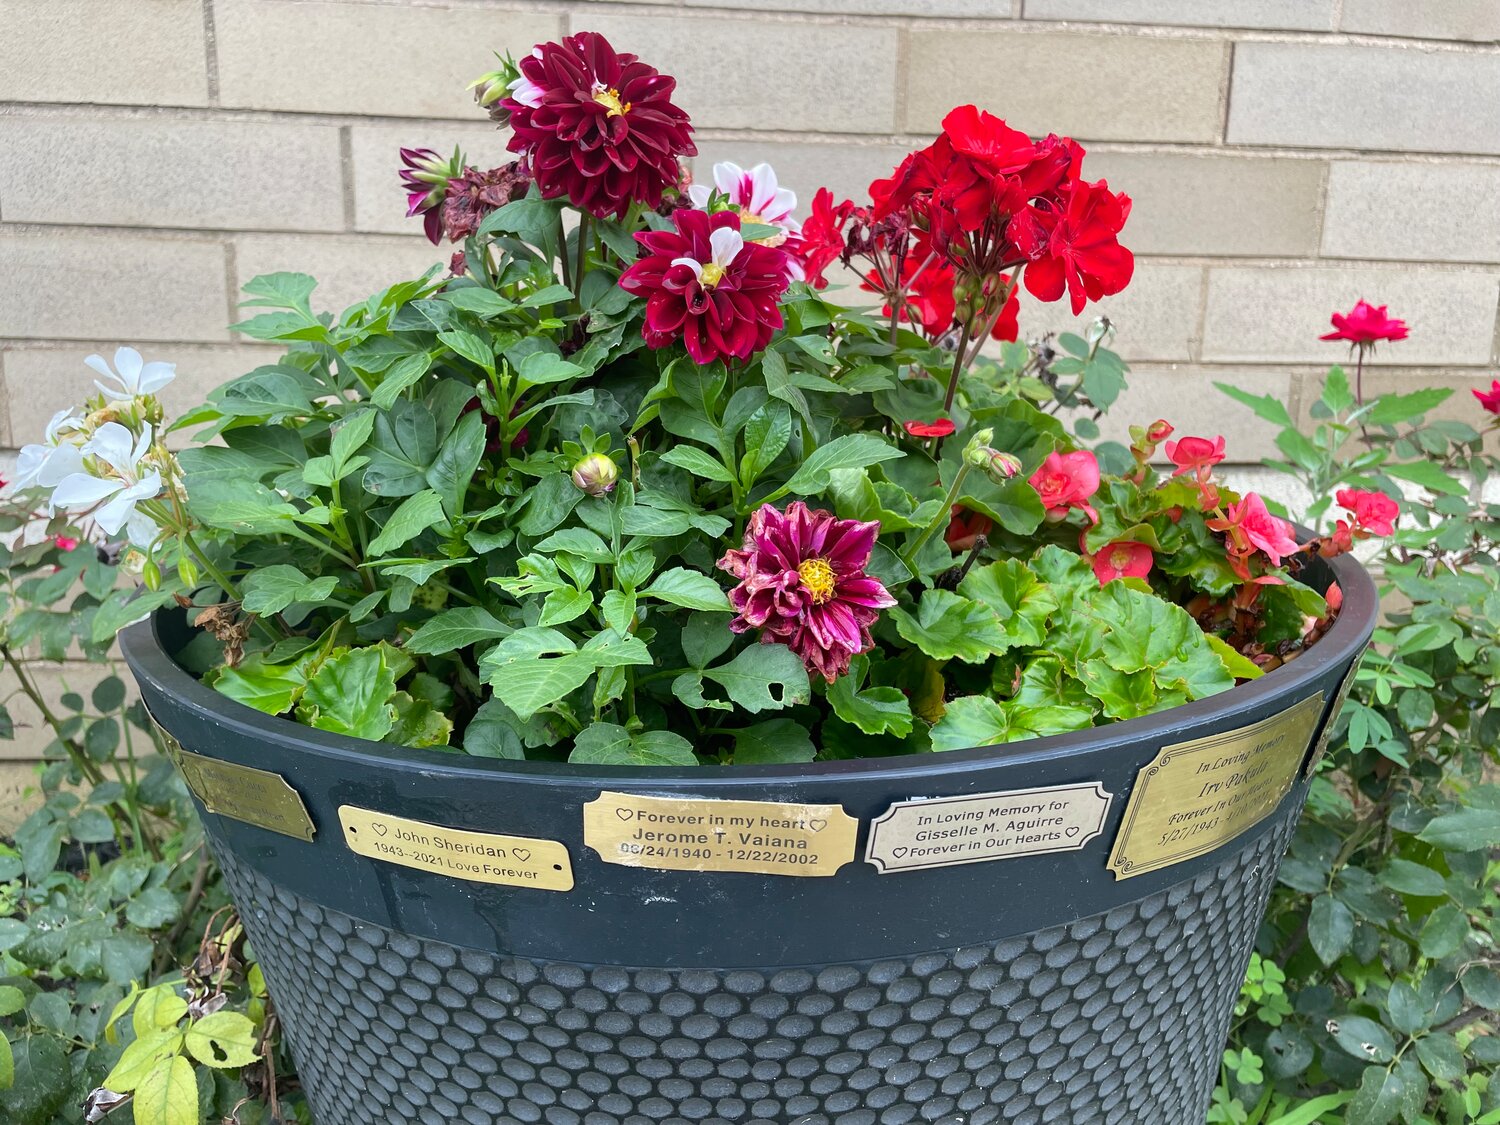 The group has a flowerpot outside the Lynbrook Library with plaques honoring their loved ones.